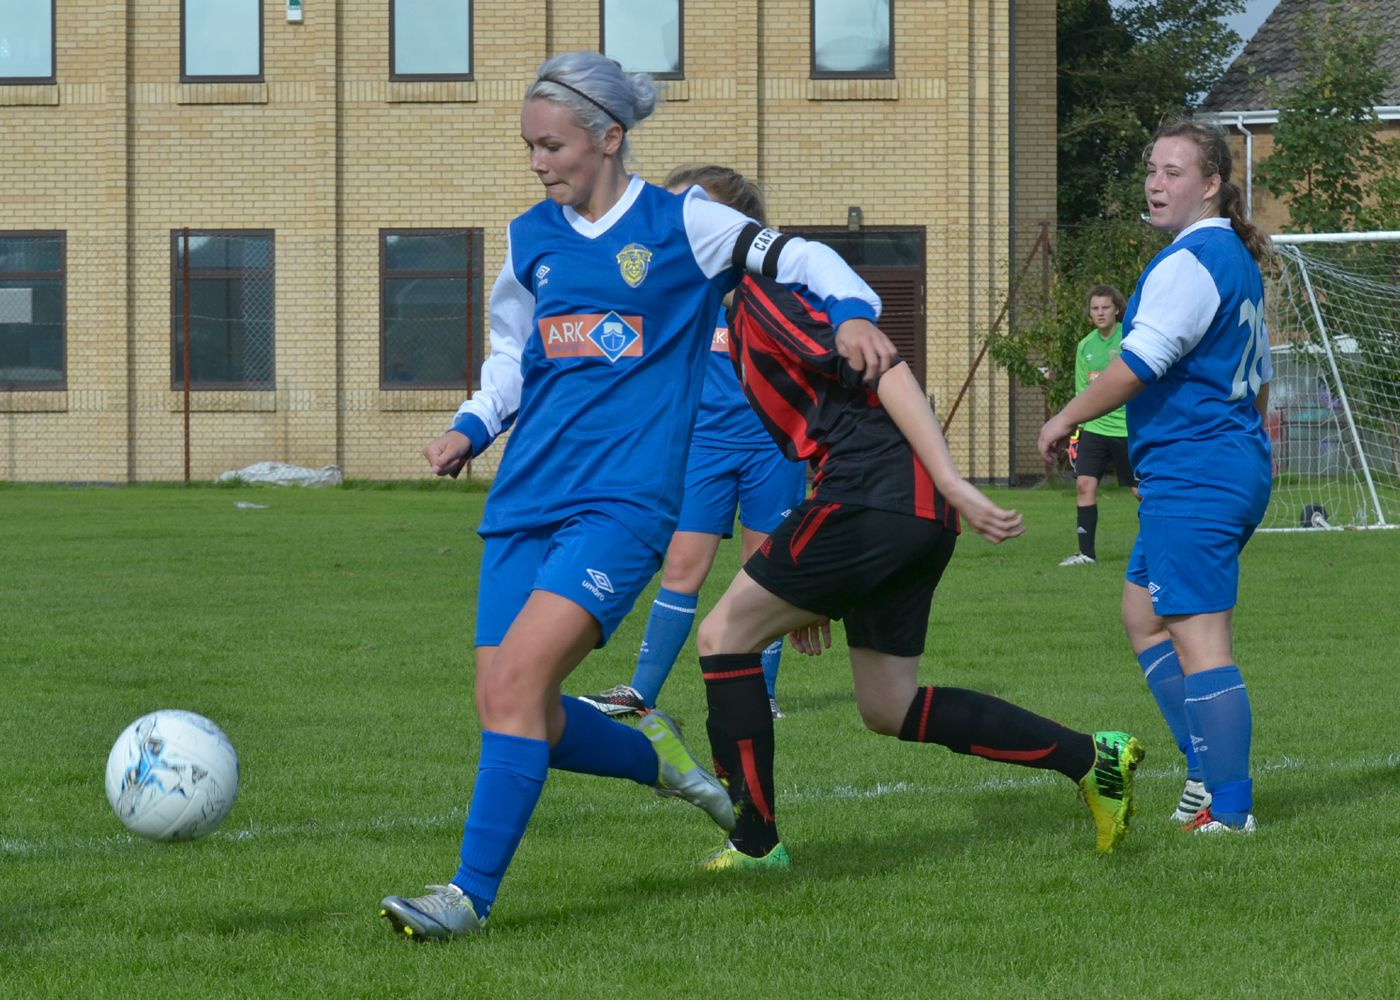 WELSH WIZARD: Tegan Wheeler in action for Spalding United. Photo by JAKE WHITELEY